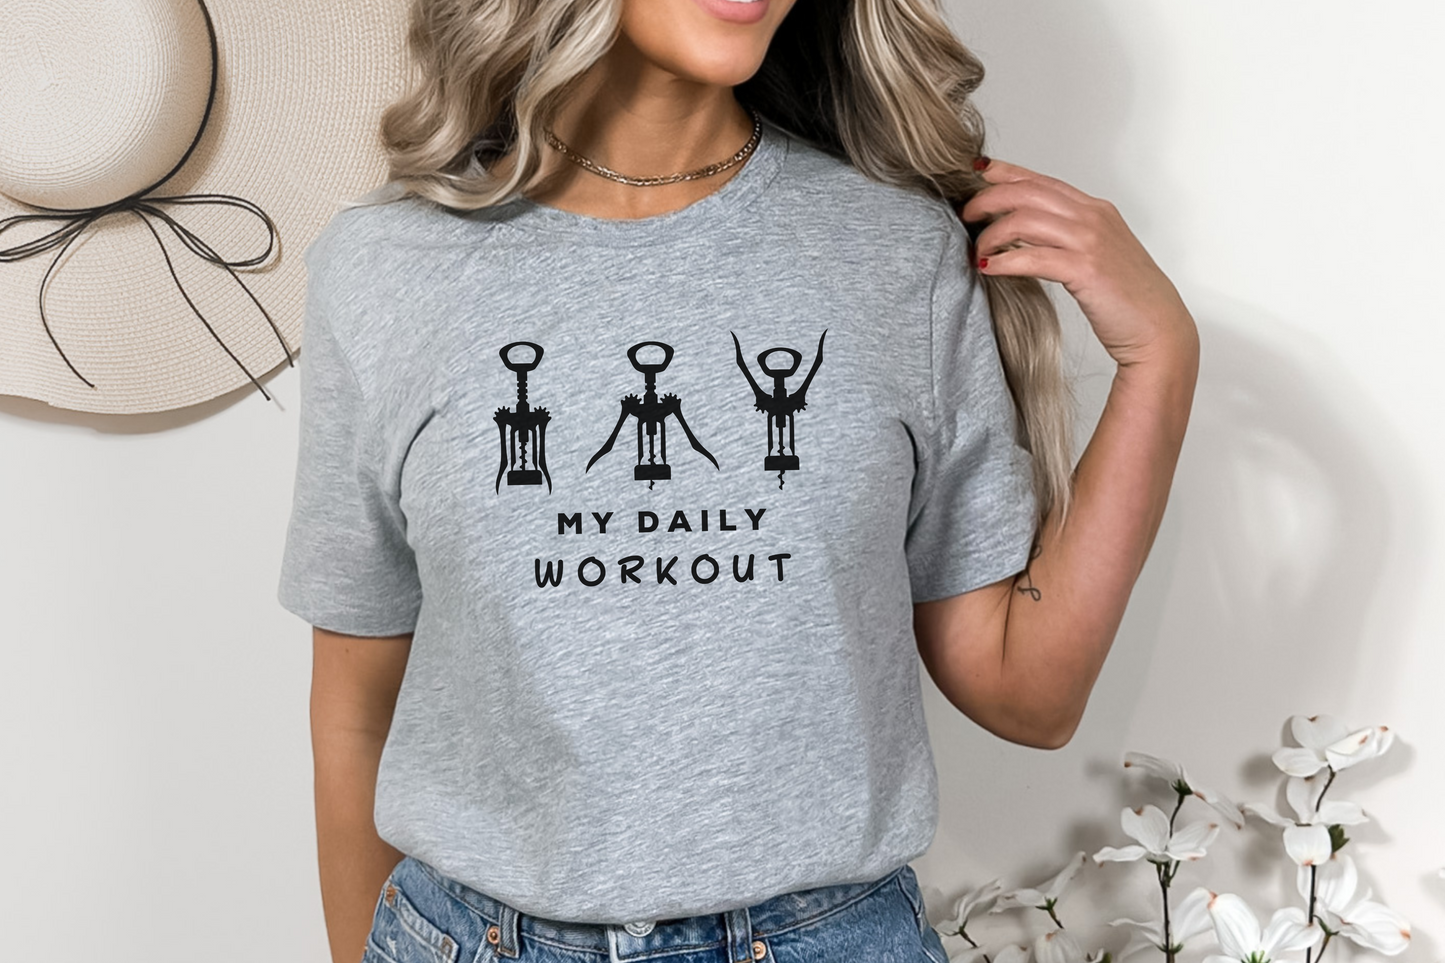 MY DAILY WORKOUT T-shirt